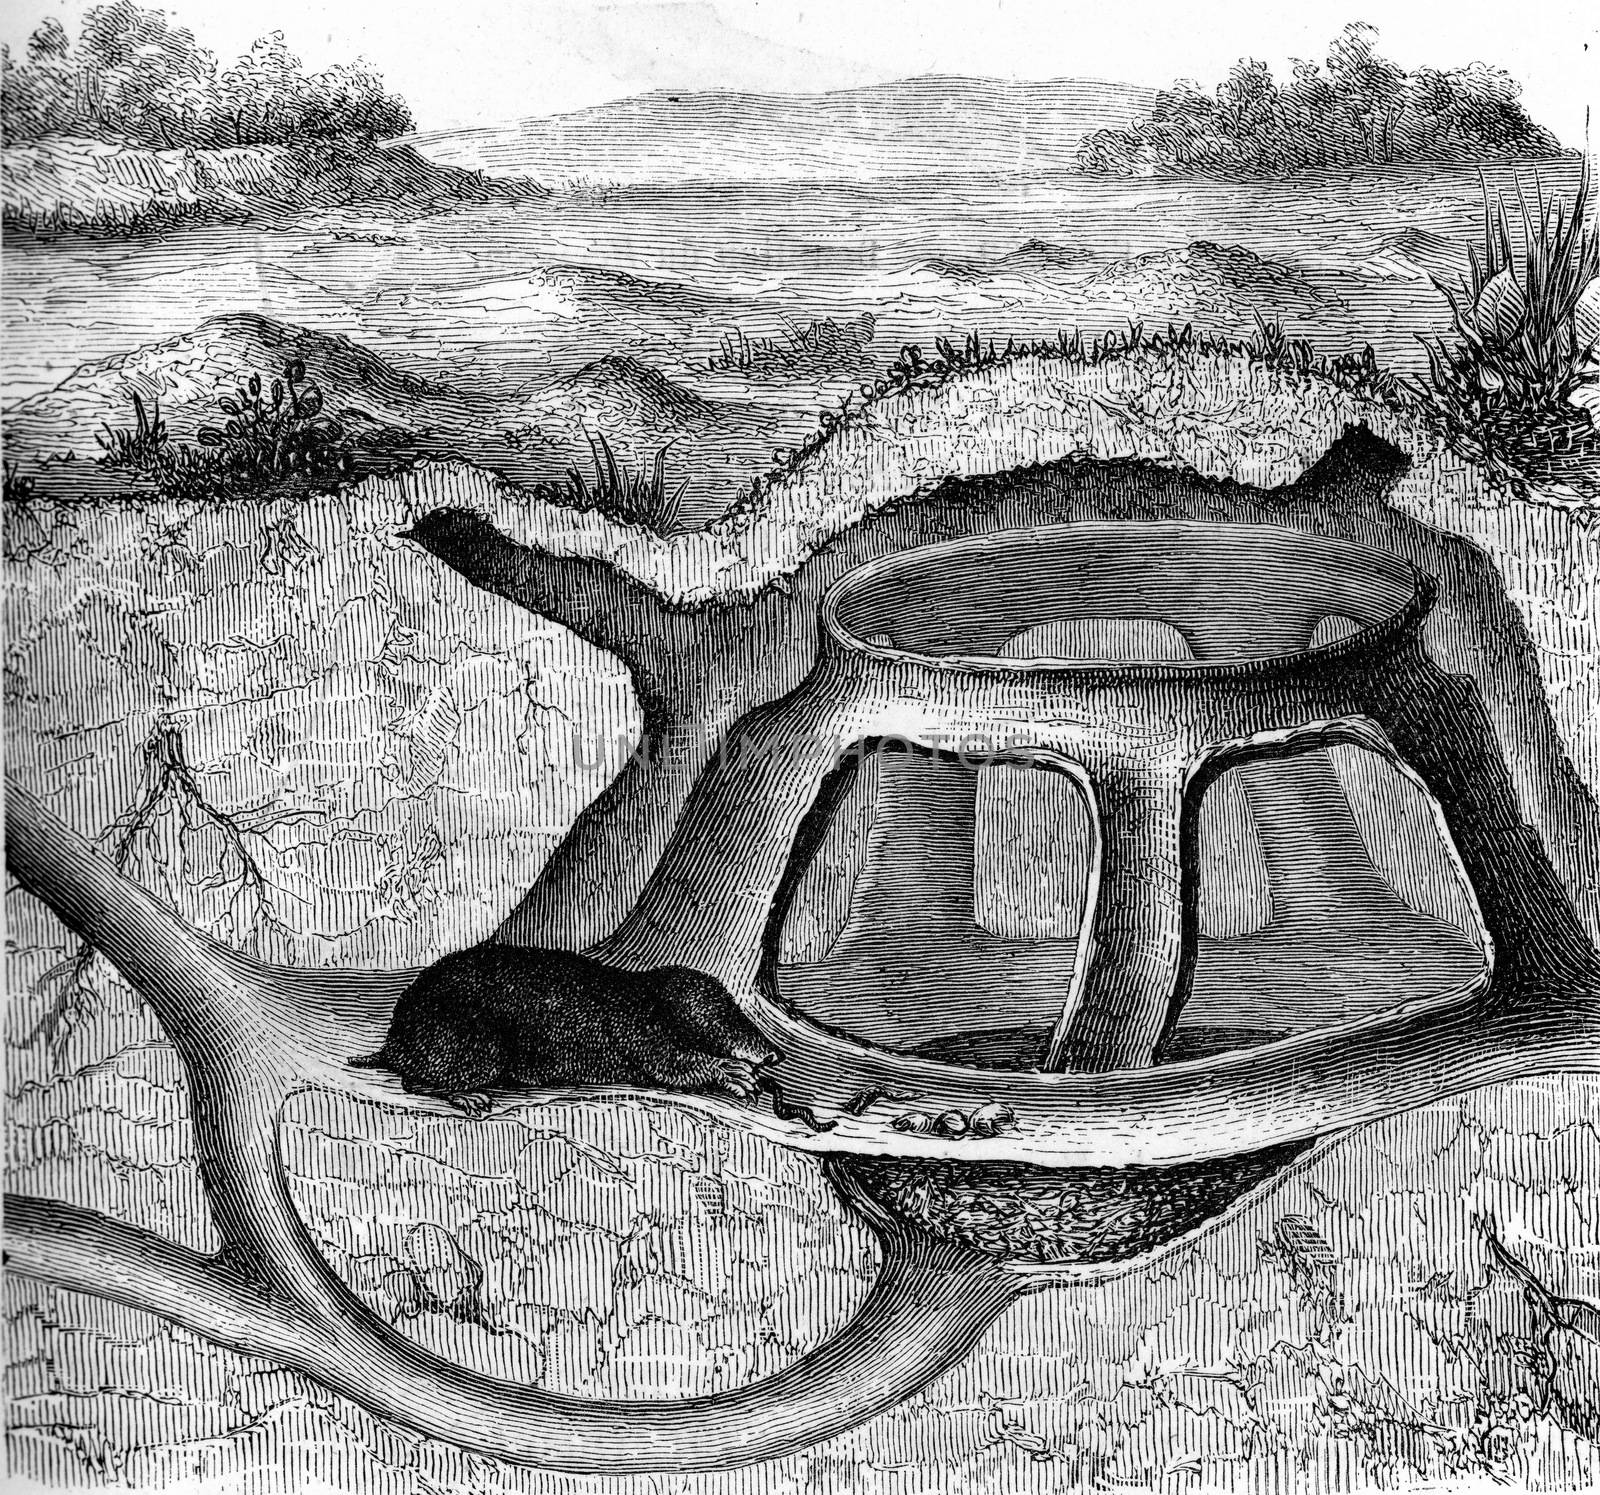 Galleries of the molehill, vintage engraved illustration. From Zoology Elements from Paul Gervais.
